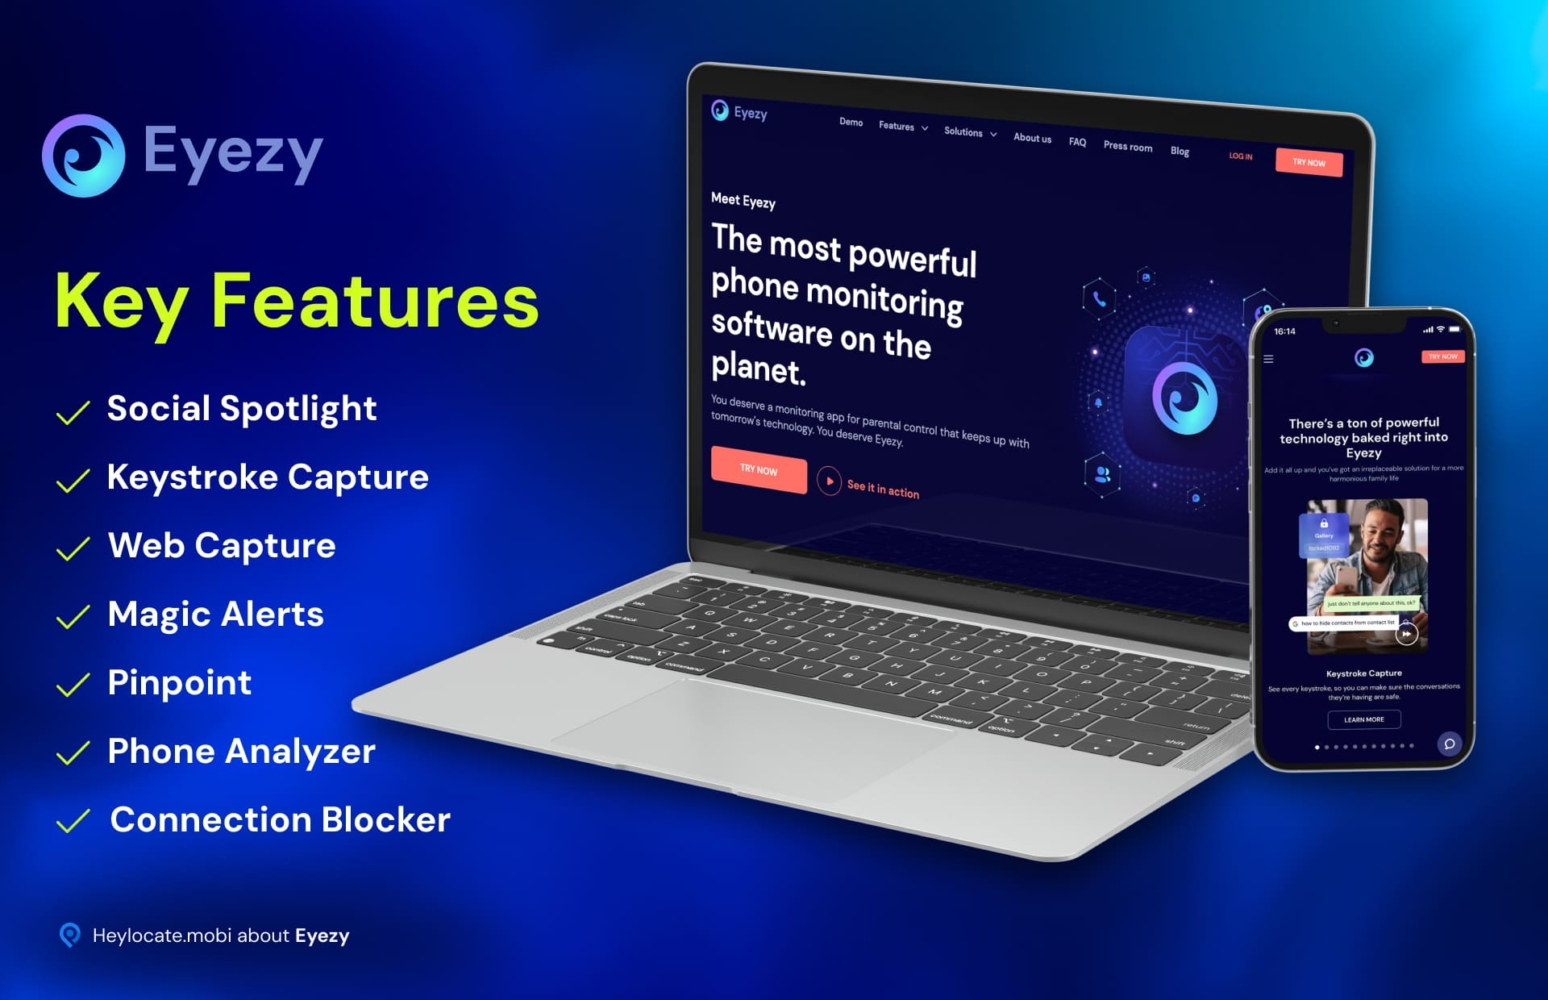 Infographic presenting Eyezy, a phone monitoring software, highlighting its key features such as Social Spotlight, Keystroke Capture, Web Capture, Magic Alerts, Pinpoint, Phone Analyzer, and Connection Blocker displayed on a laptop and mobile screen.